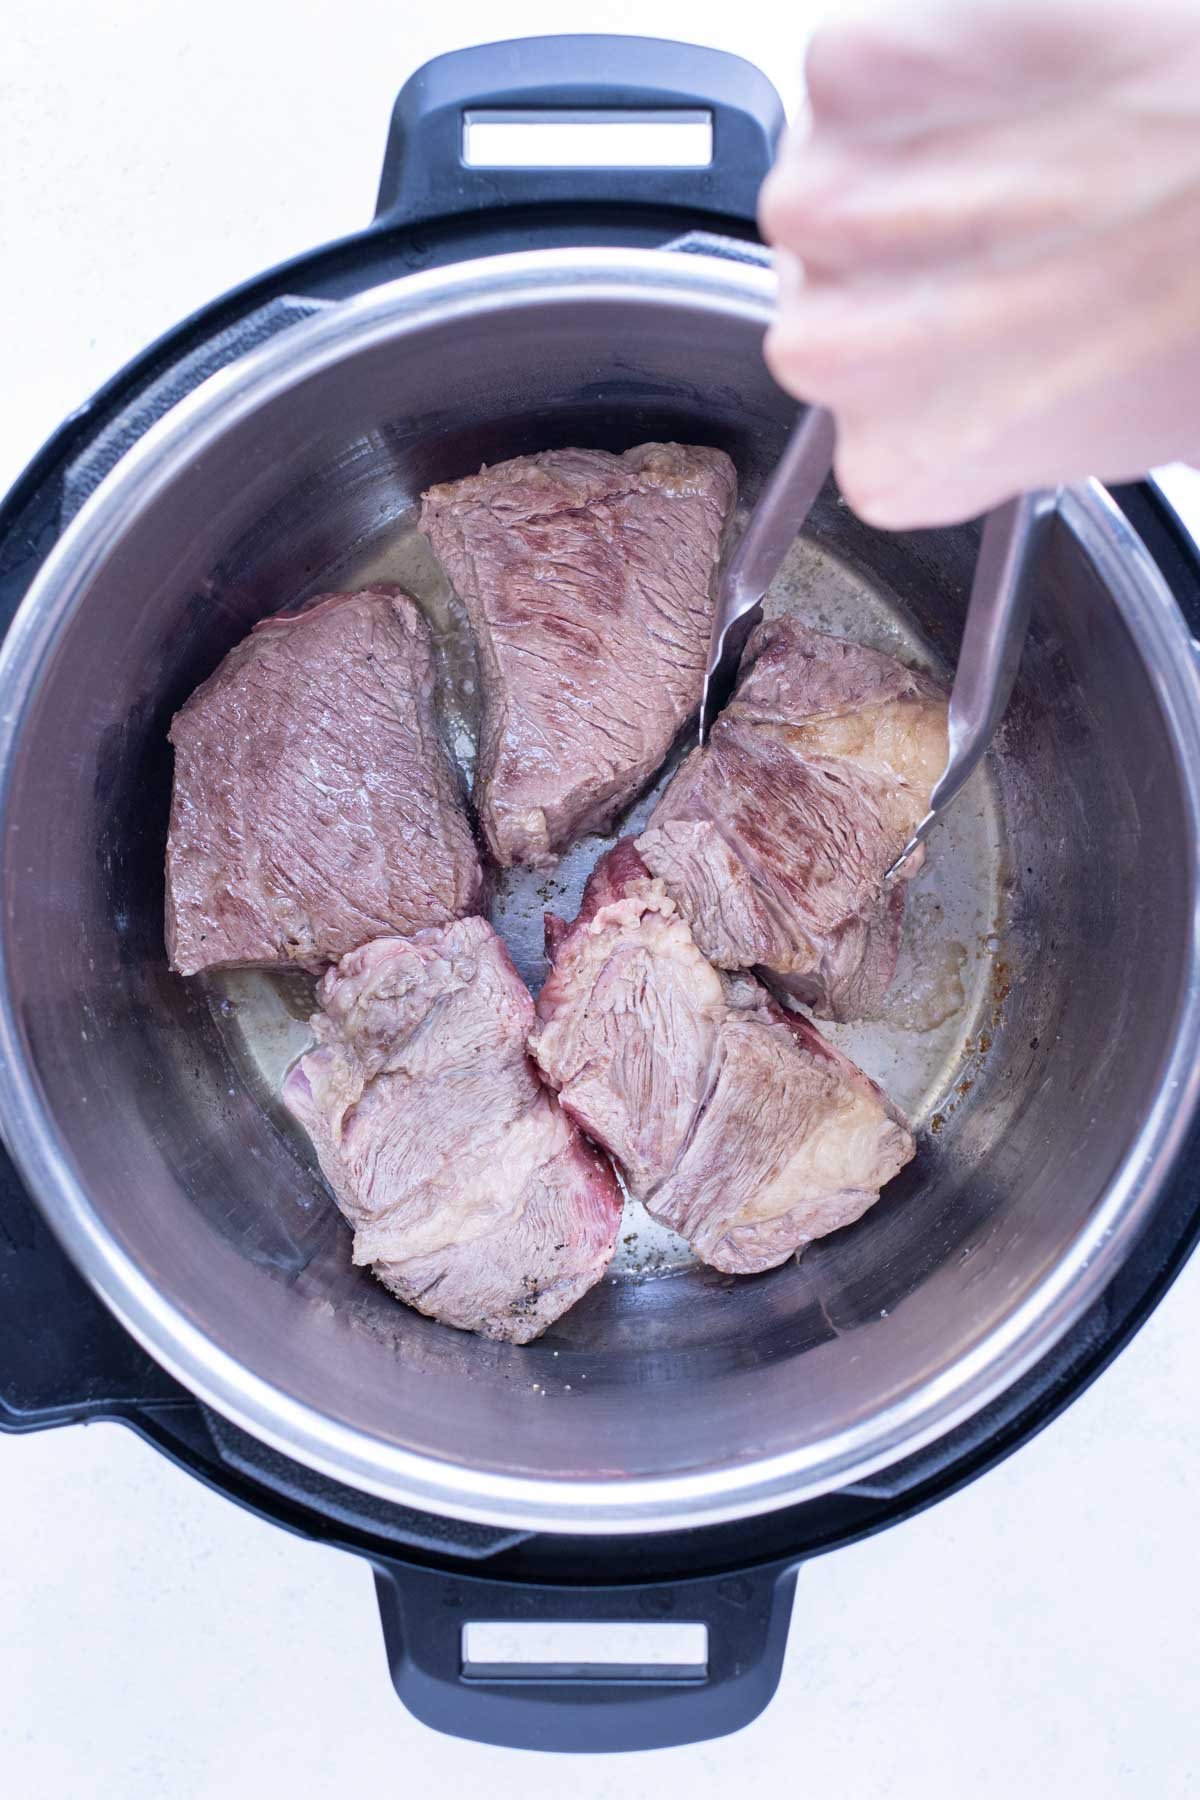 Chuck roast is seared in the instant pot.